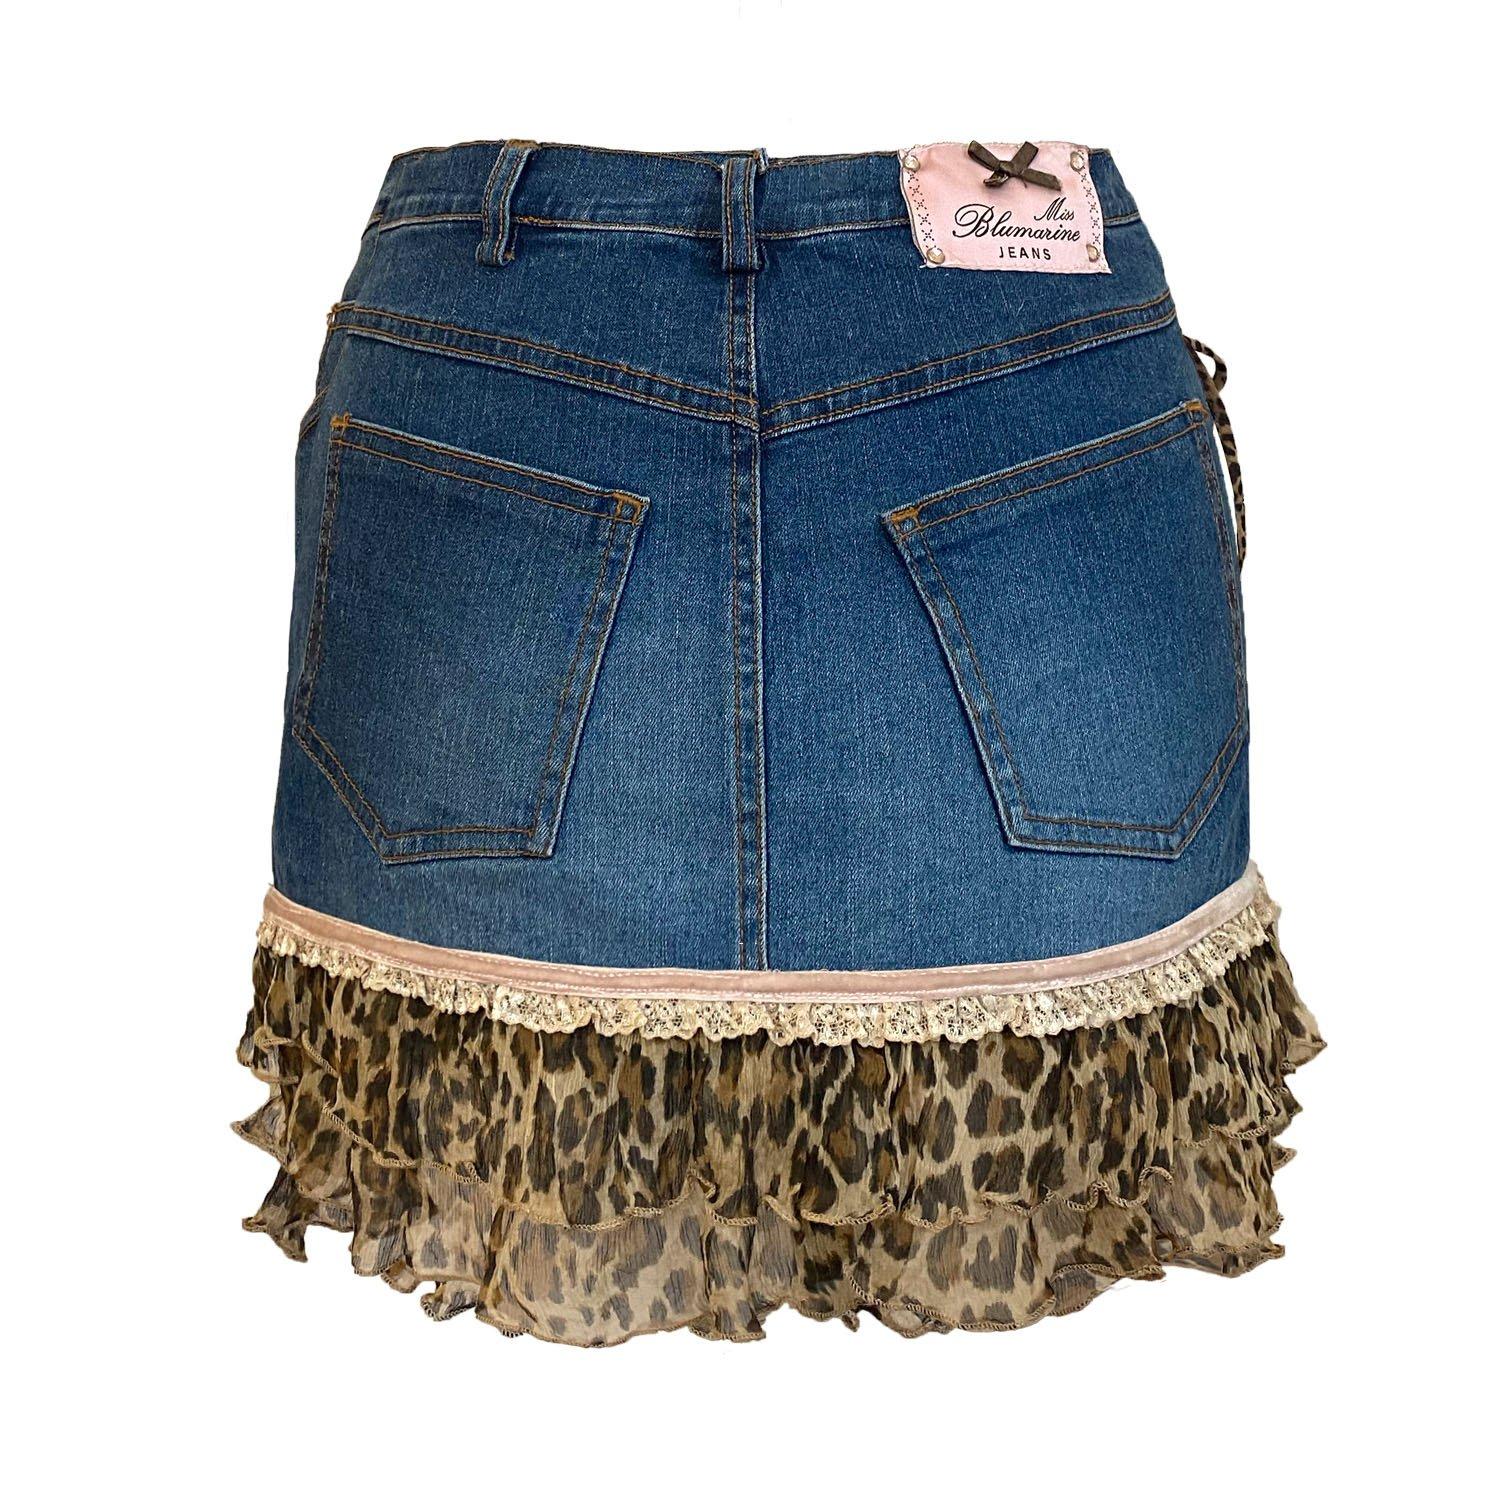 Vintage Blumarine Jeans blue denim mini skirt. Iconic 00s low-rise style, rare and hard to find. Tiered silk frill in a leopard print pattern with a lace and velvet banding. Miss Blumarine Jeans label in pink to the back featuring a bow and gems